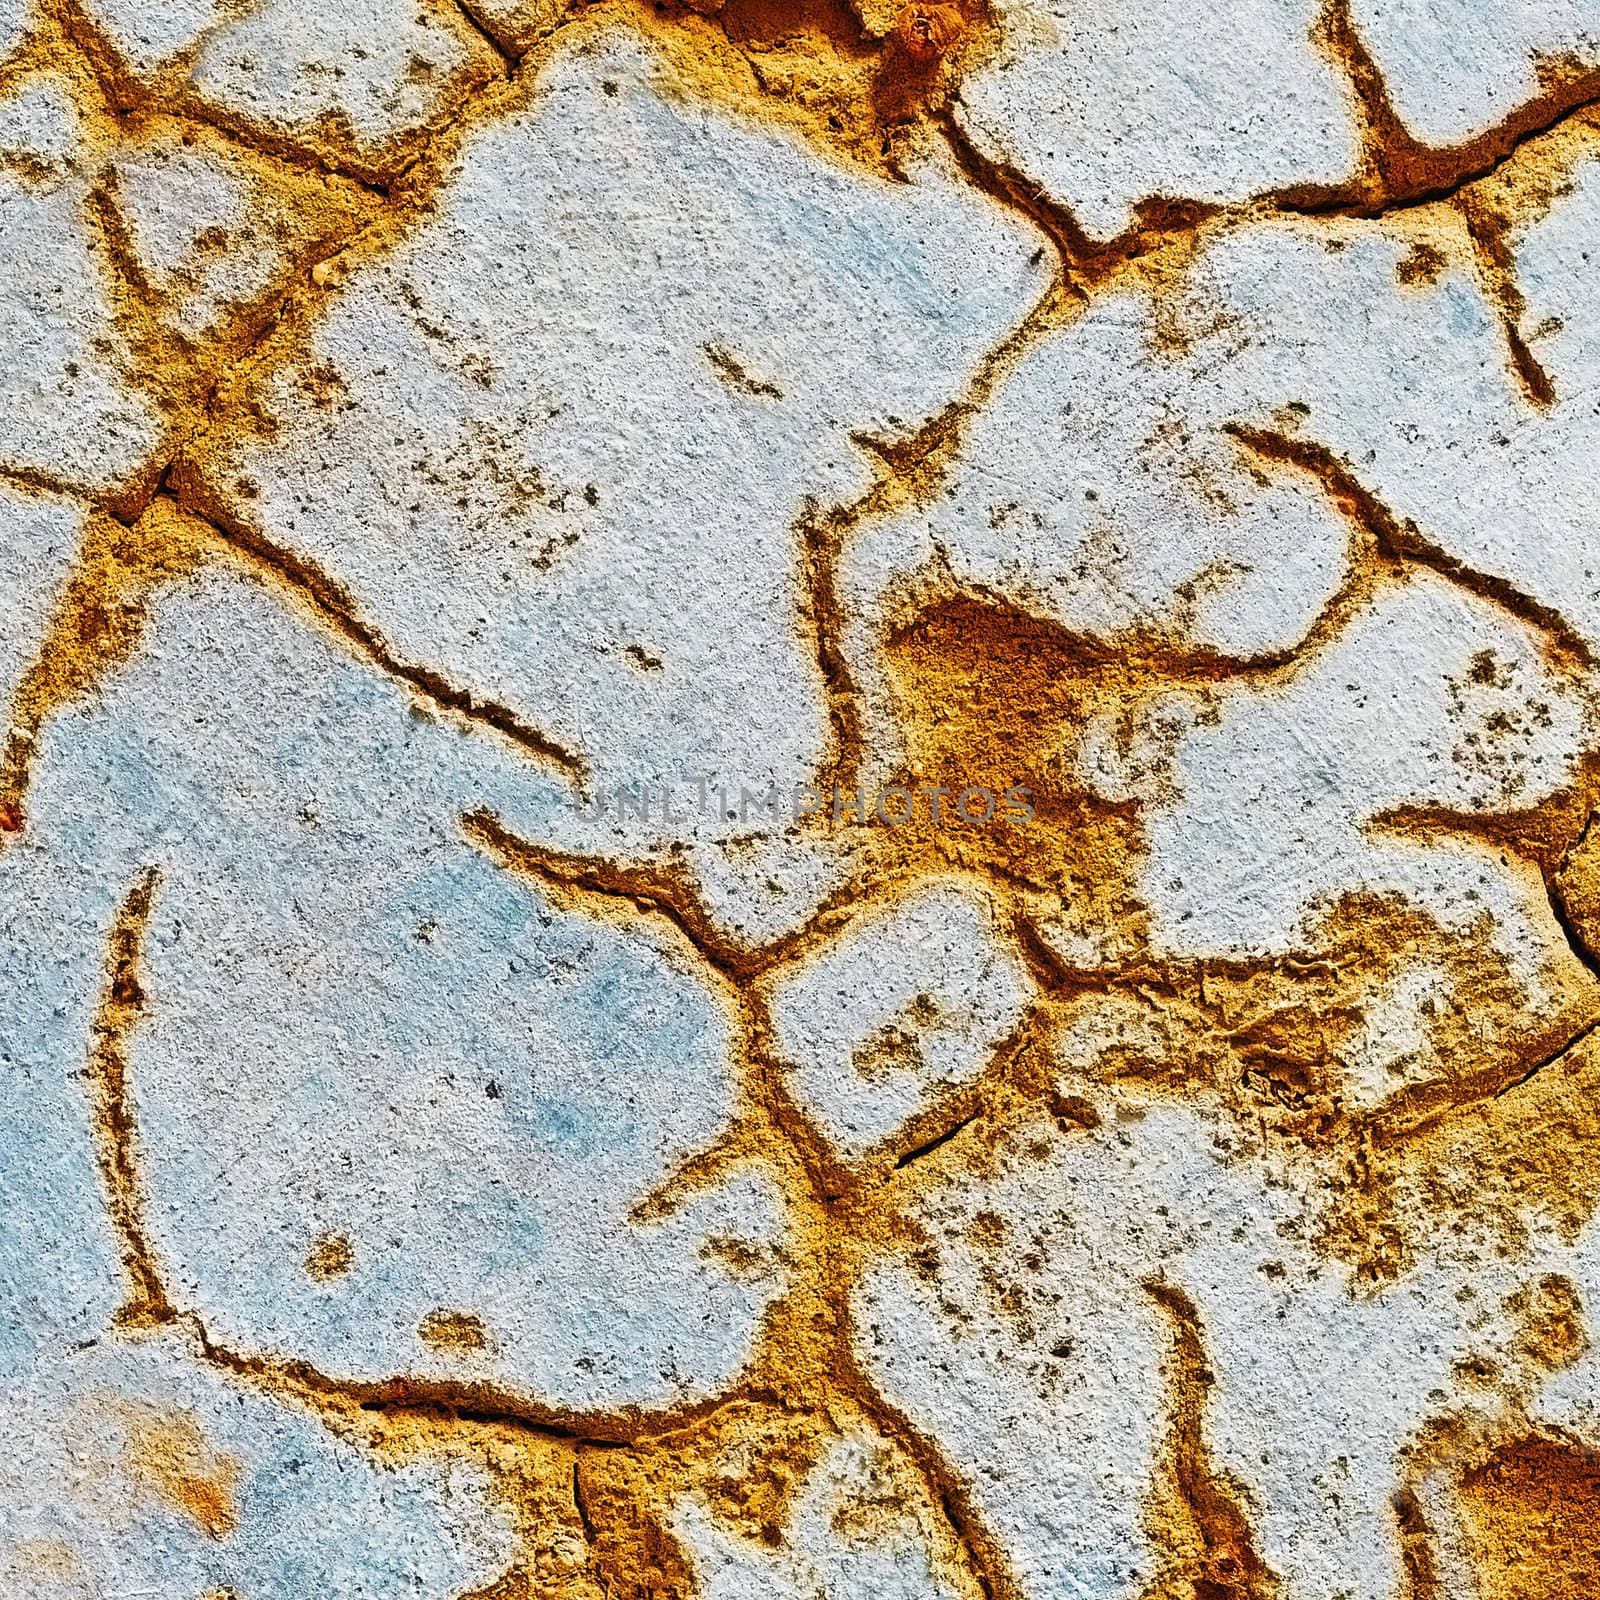 The big cracks on a surface of old plaster